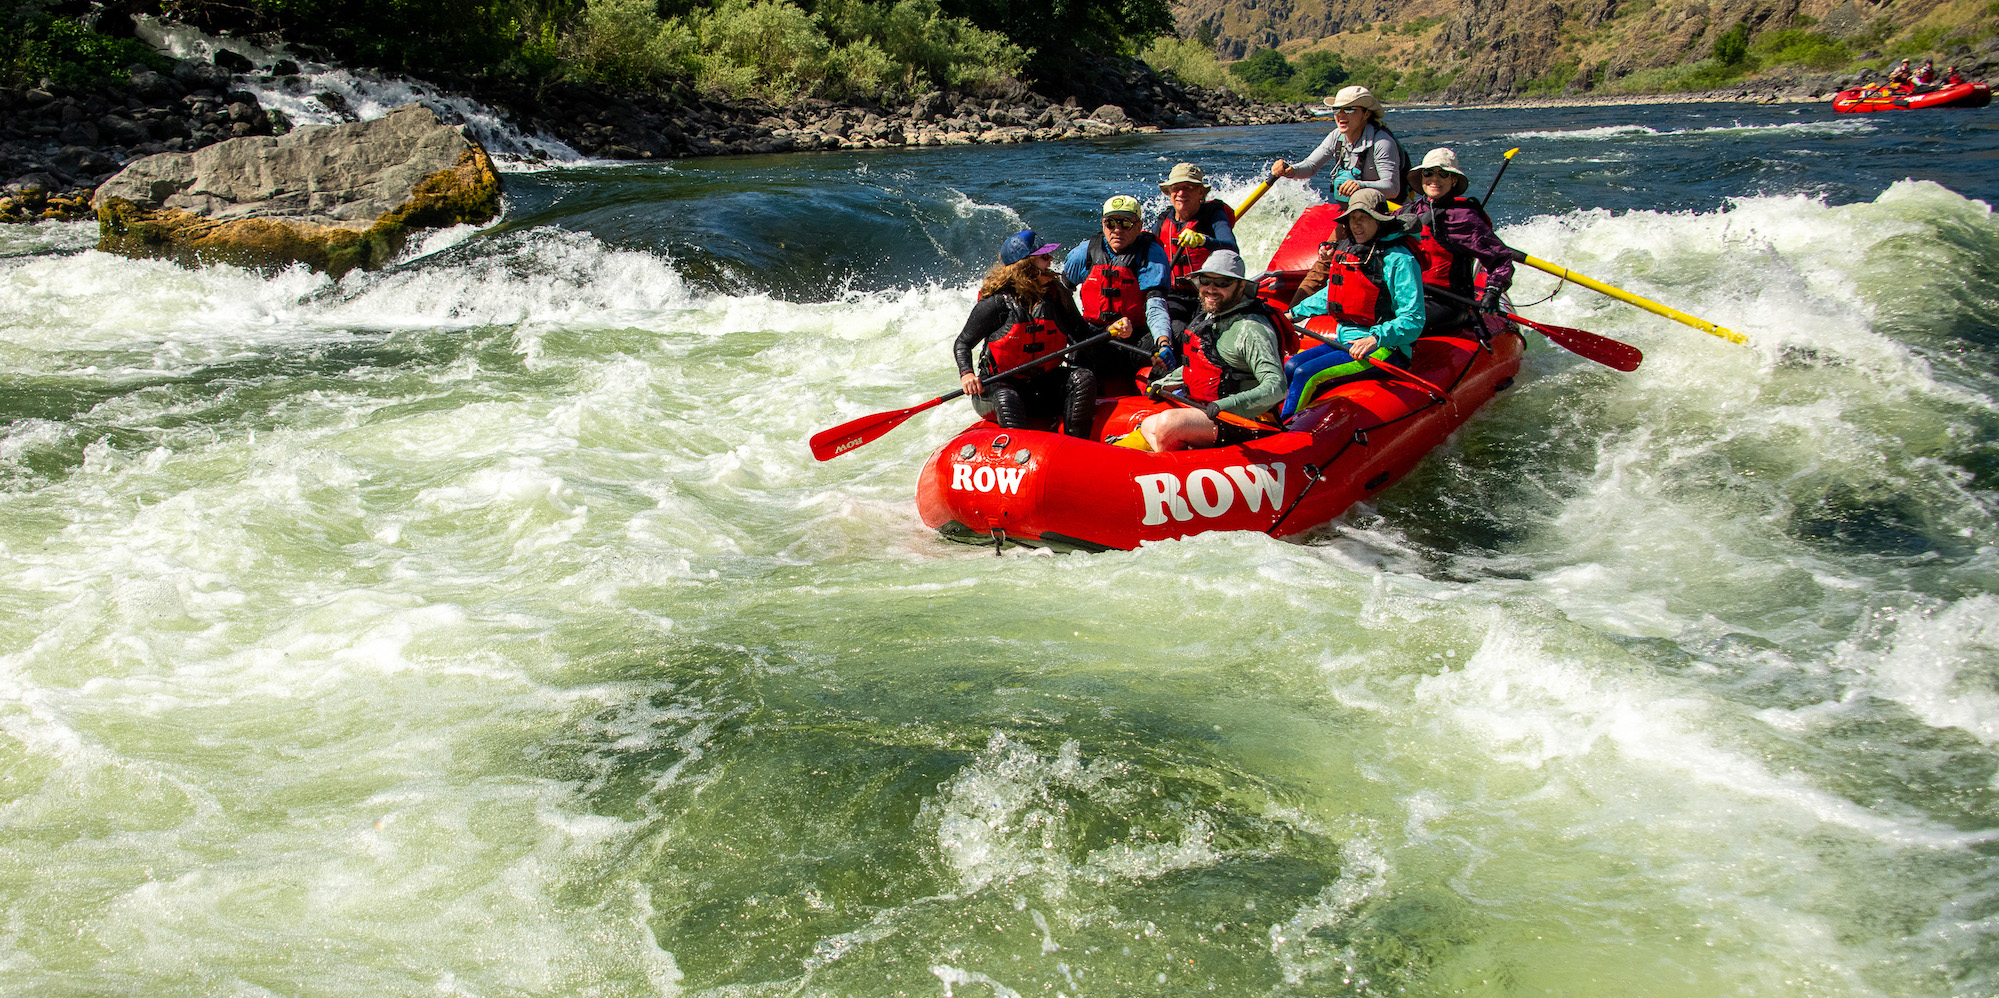 Upstream shot of a group rafting through a rapid on the Snake River through Hells Canyon